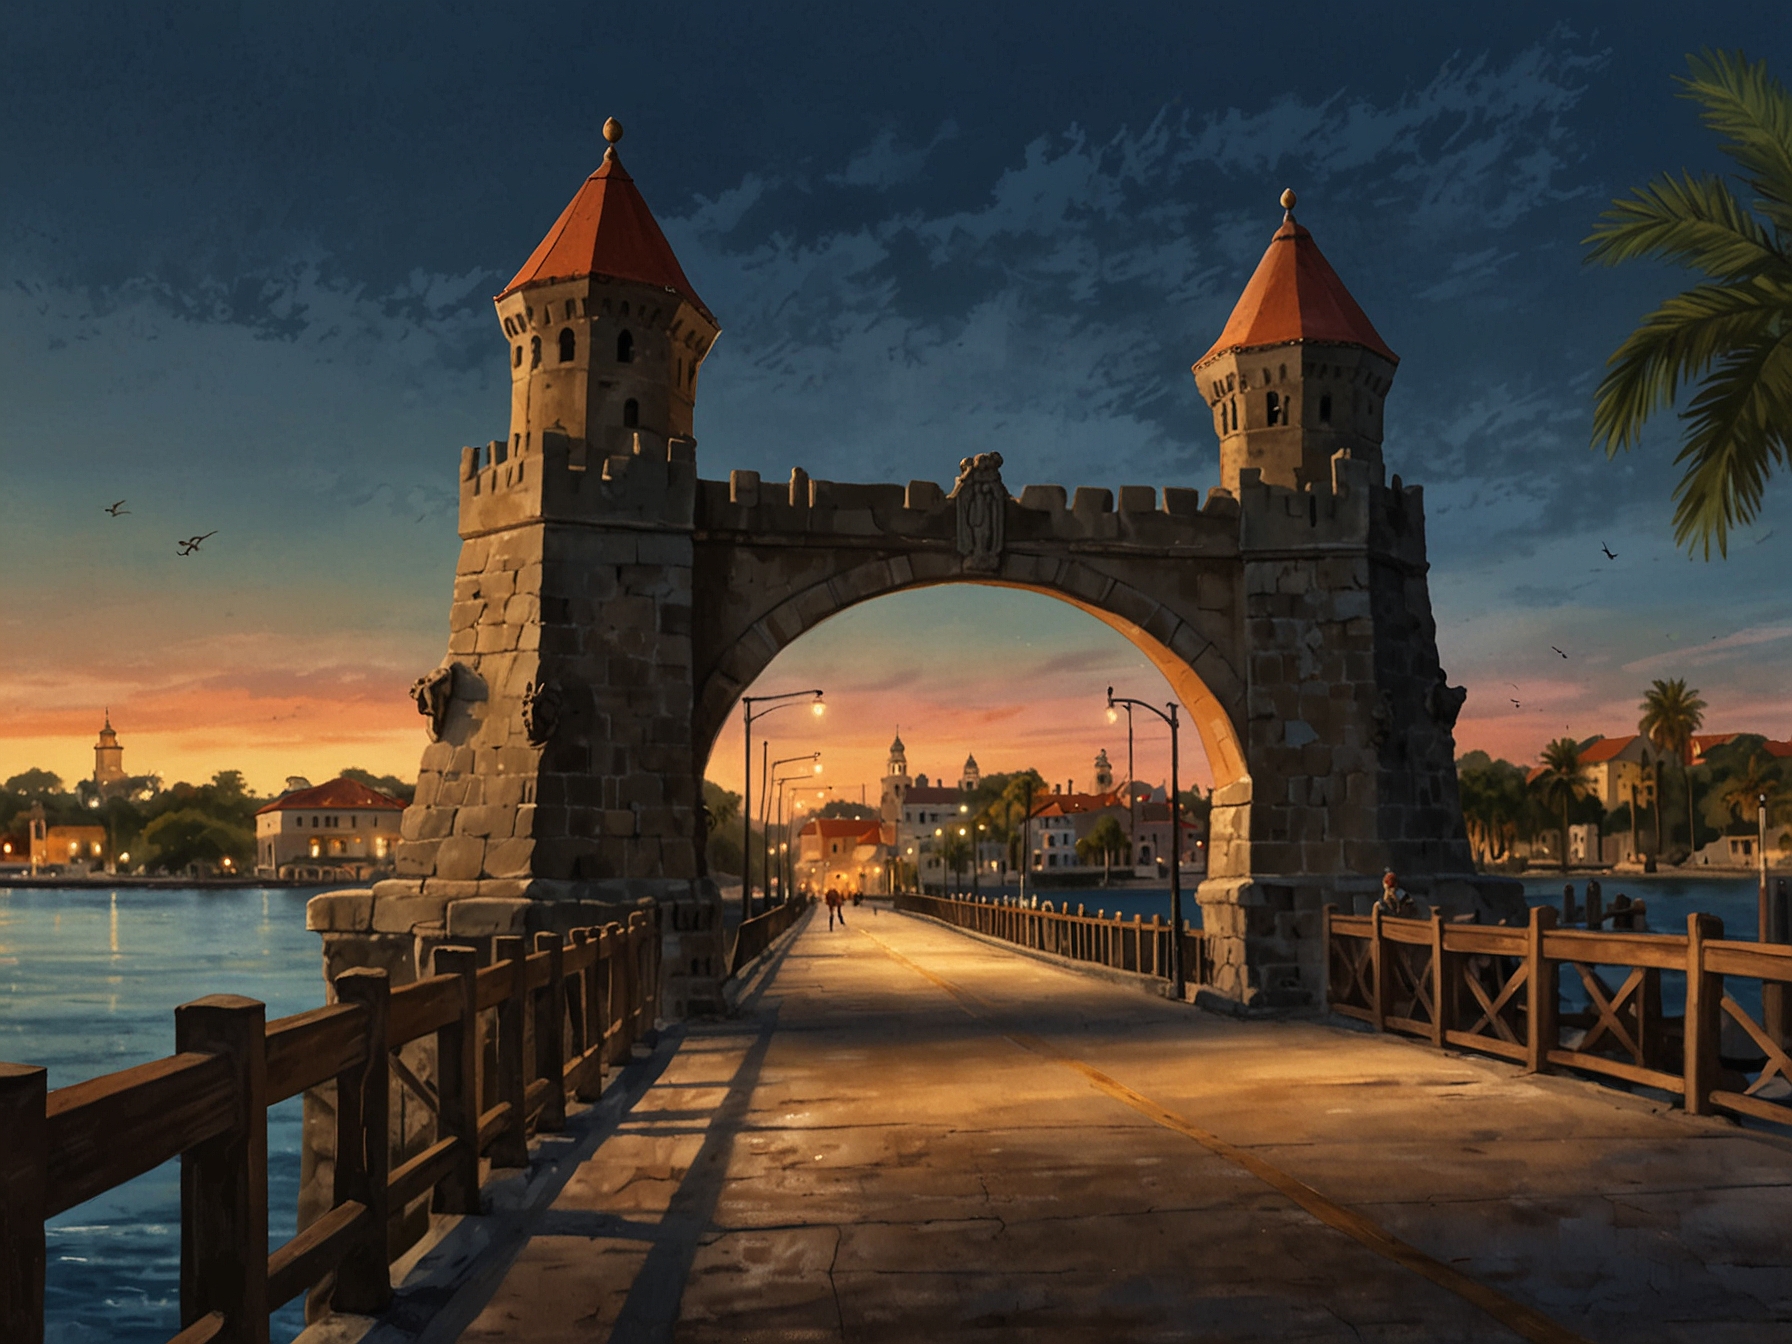 The Bridge of Lions, a mile-long drawbridge in St. Augustine, adorned with Medici lions statues. Walking across offers stunning panoramic views of the city’s skyline and harbor, especially at sunset.